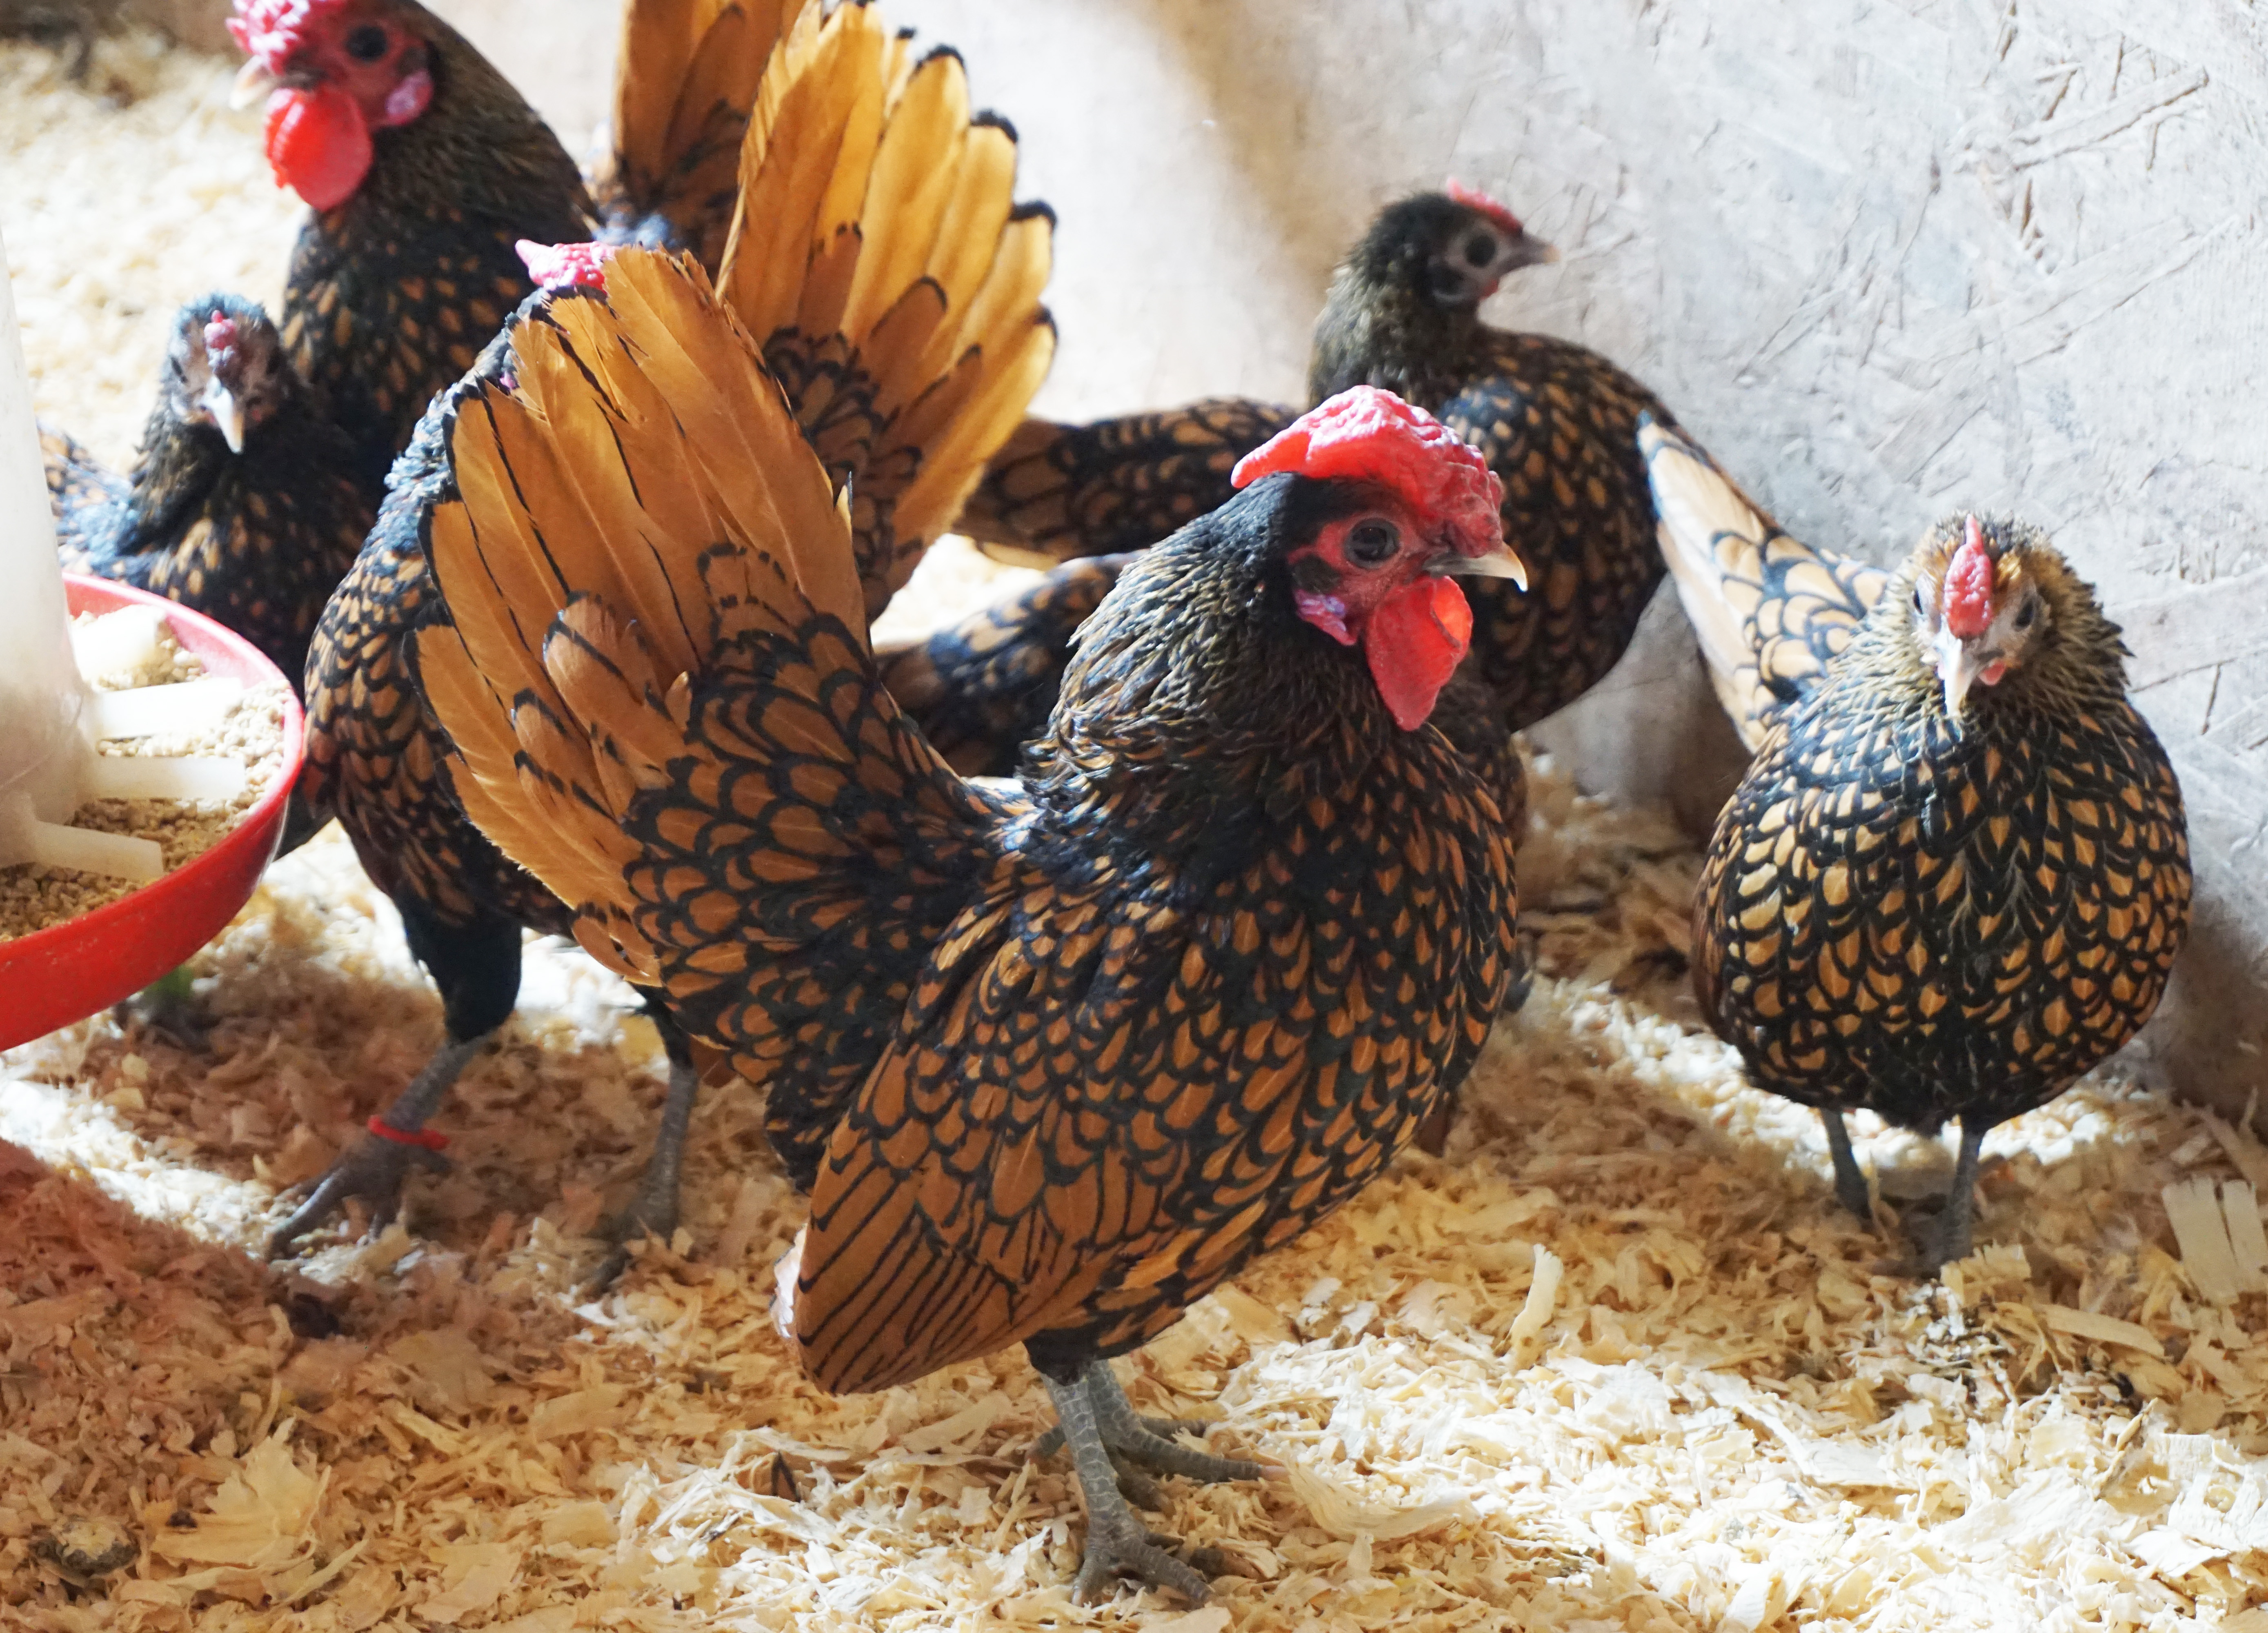 A Golden Seabright rooster and hens, one of Brother Paul's favorite varieties.